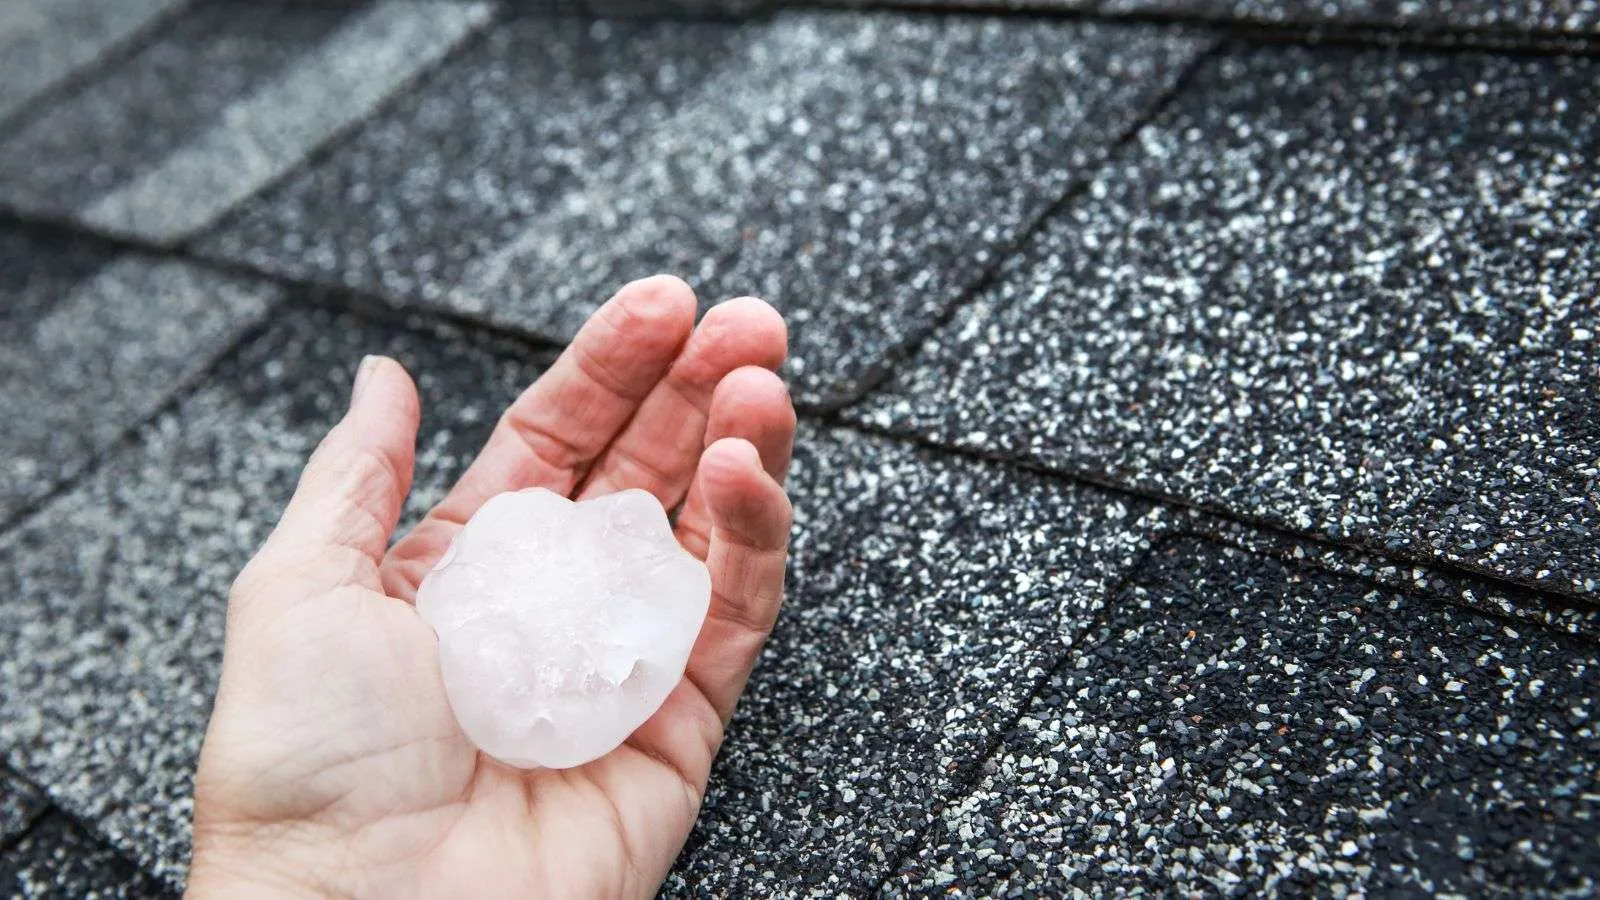 Hail storms on roof - bighomeprojects.com